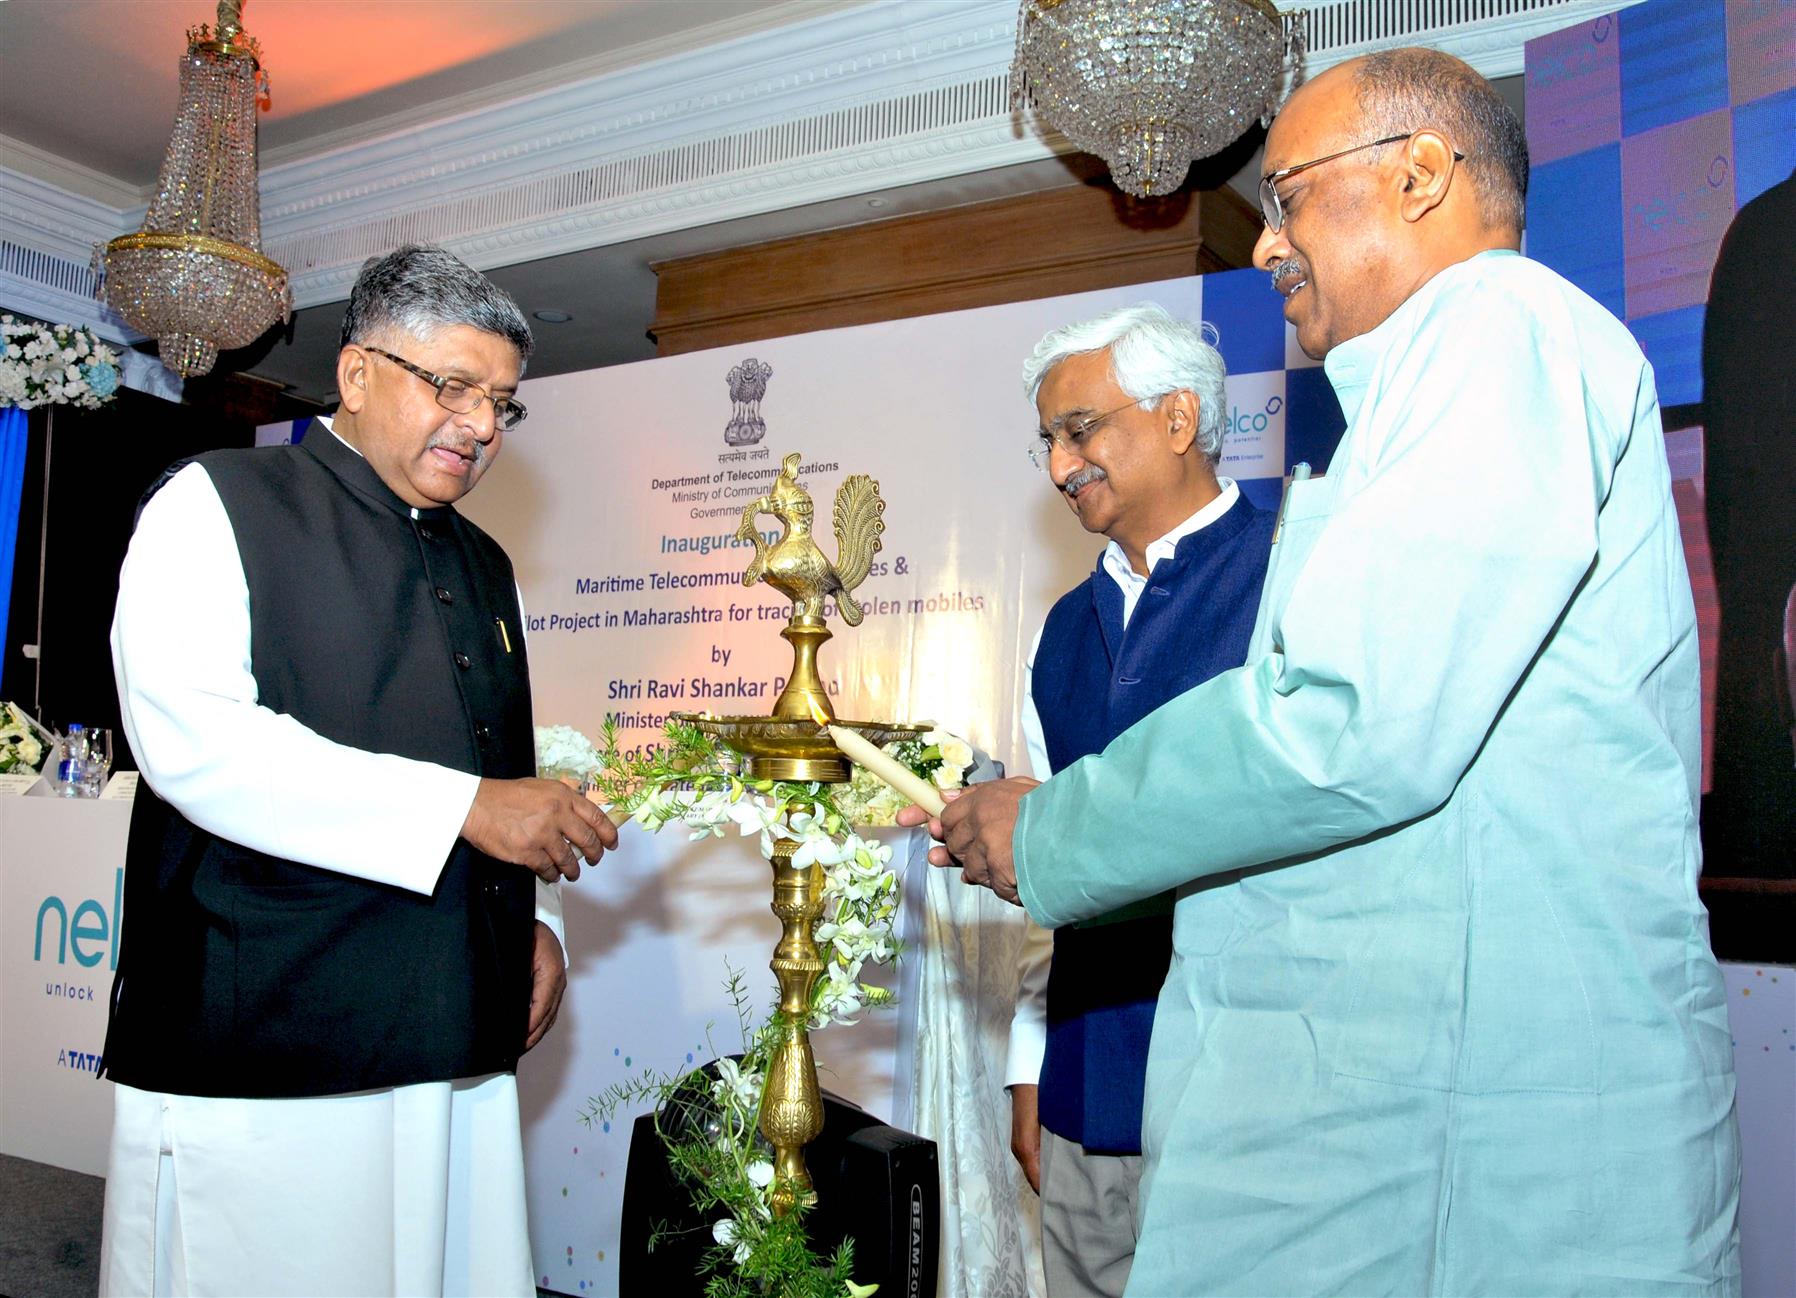 Union Minister for IT and Communication, Law and Justice and Electronics Shri Ravi Shankar Prasad lighting the lamp to inaugurate Maritime Telecommunication Service & Pilot Project in Maharashtra for Tracing stolen mobiles in Mumbai on September 13, 2019. MoS for Communication Shri Sanjay Shamrao Dhotre also present.